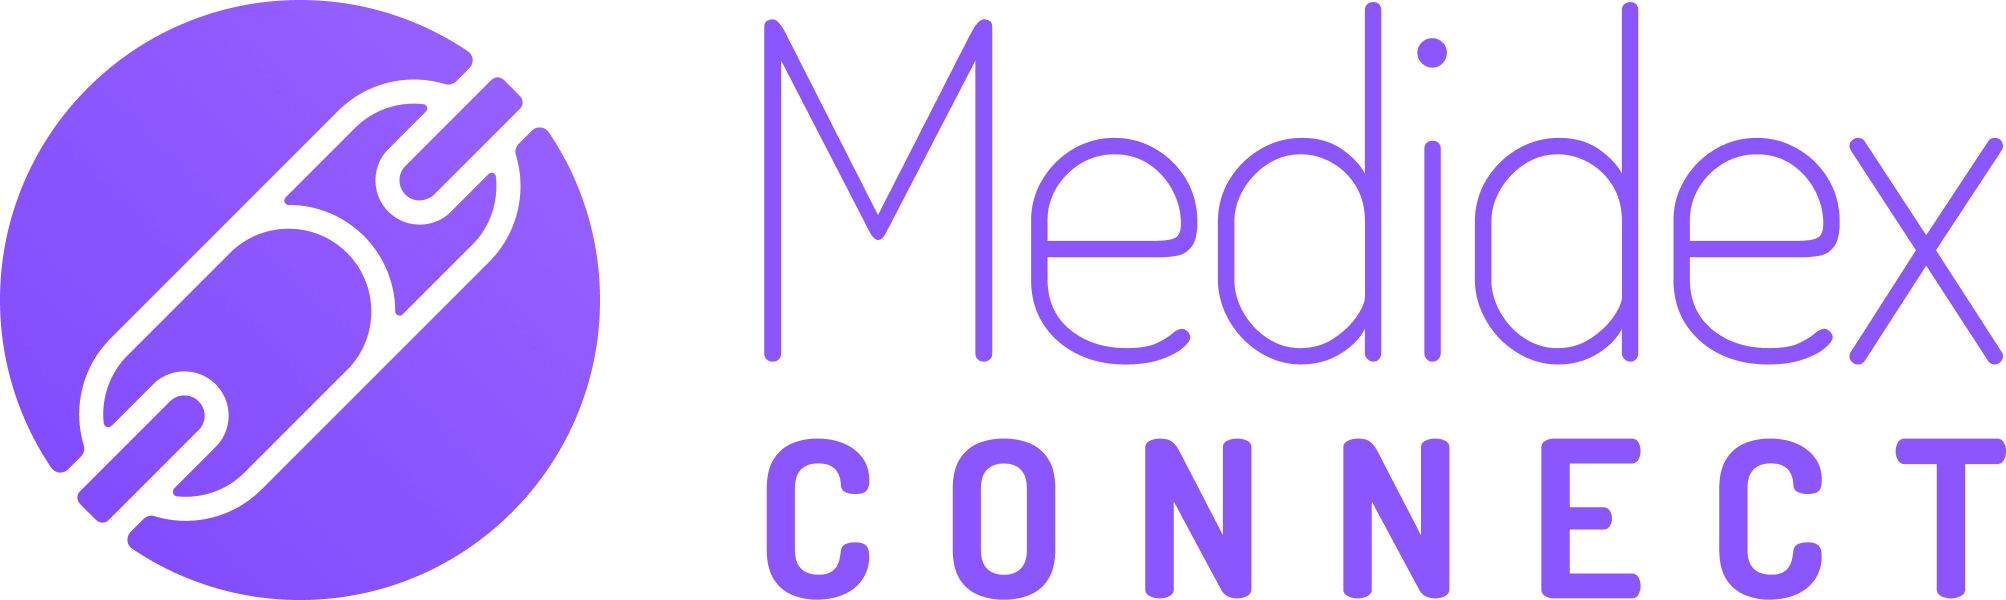 Medidex Connect - Ask A Pharmacist Online